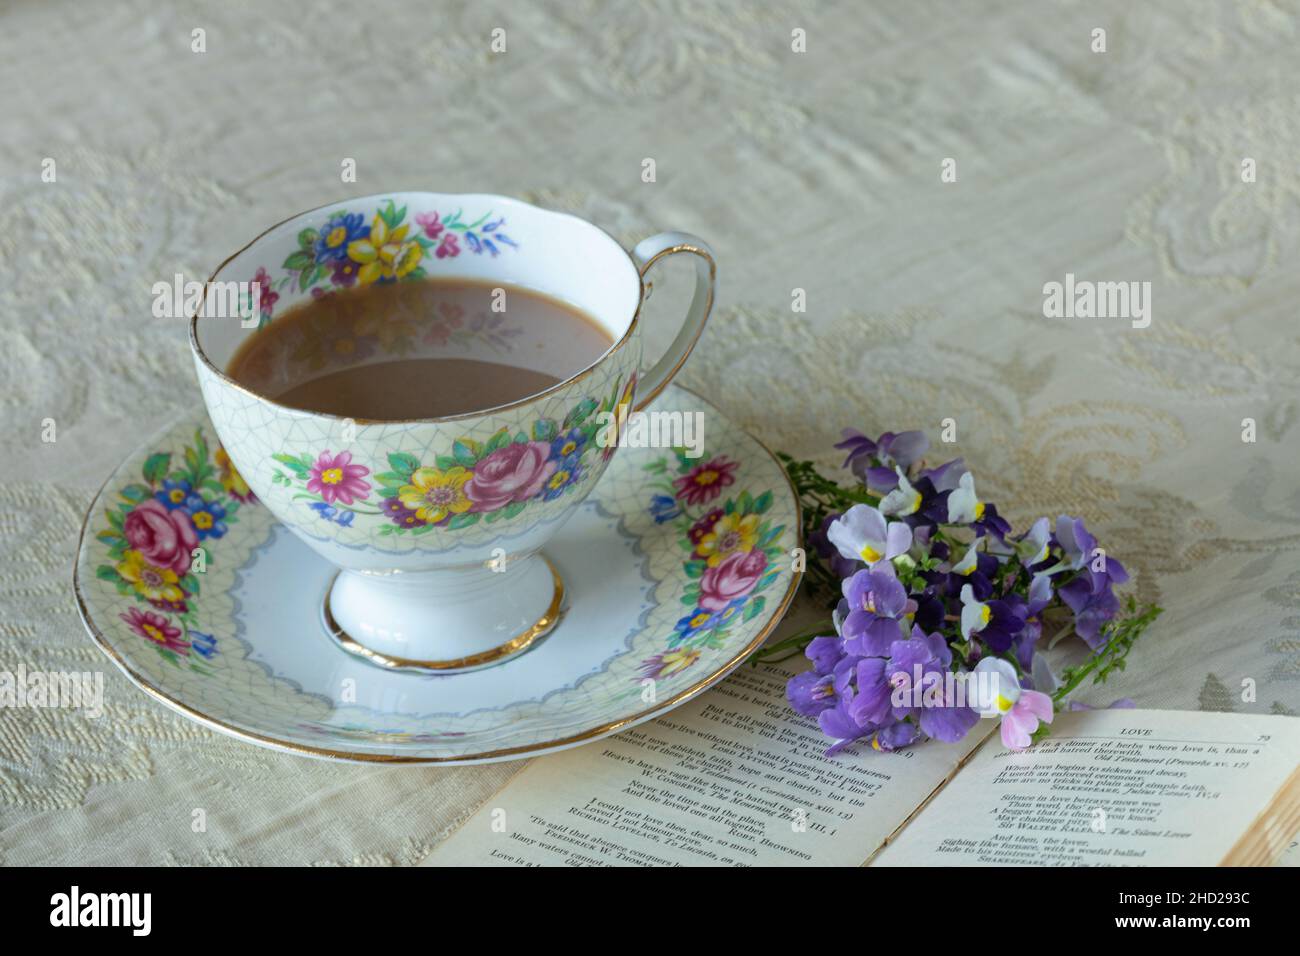 Cup of tea in a floral china cup with saucer on a patterned tablecloth with flowers and small book. Stock Photo